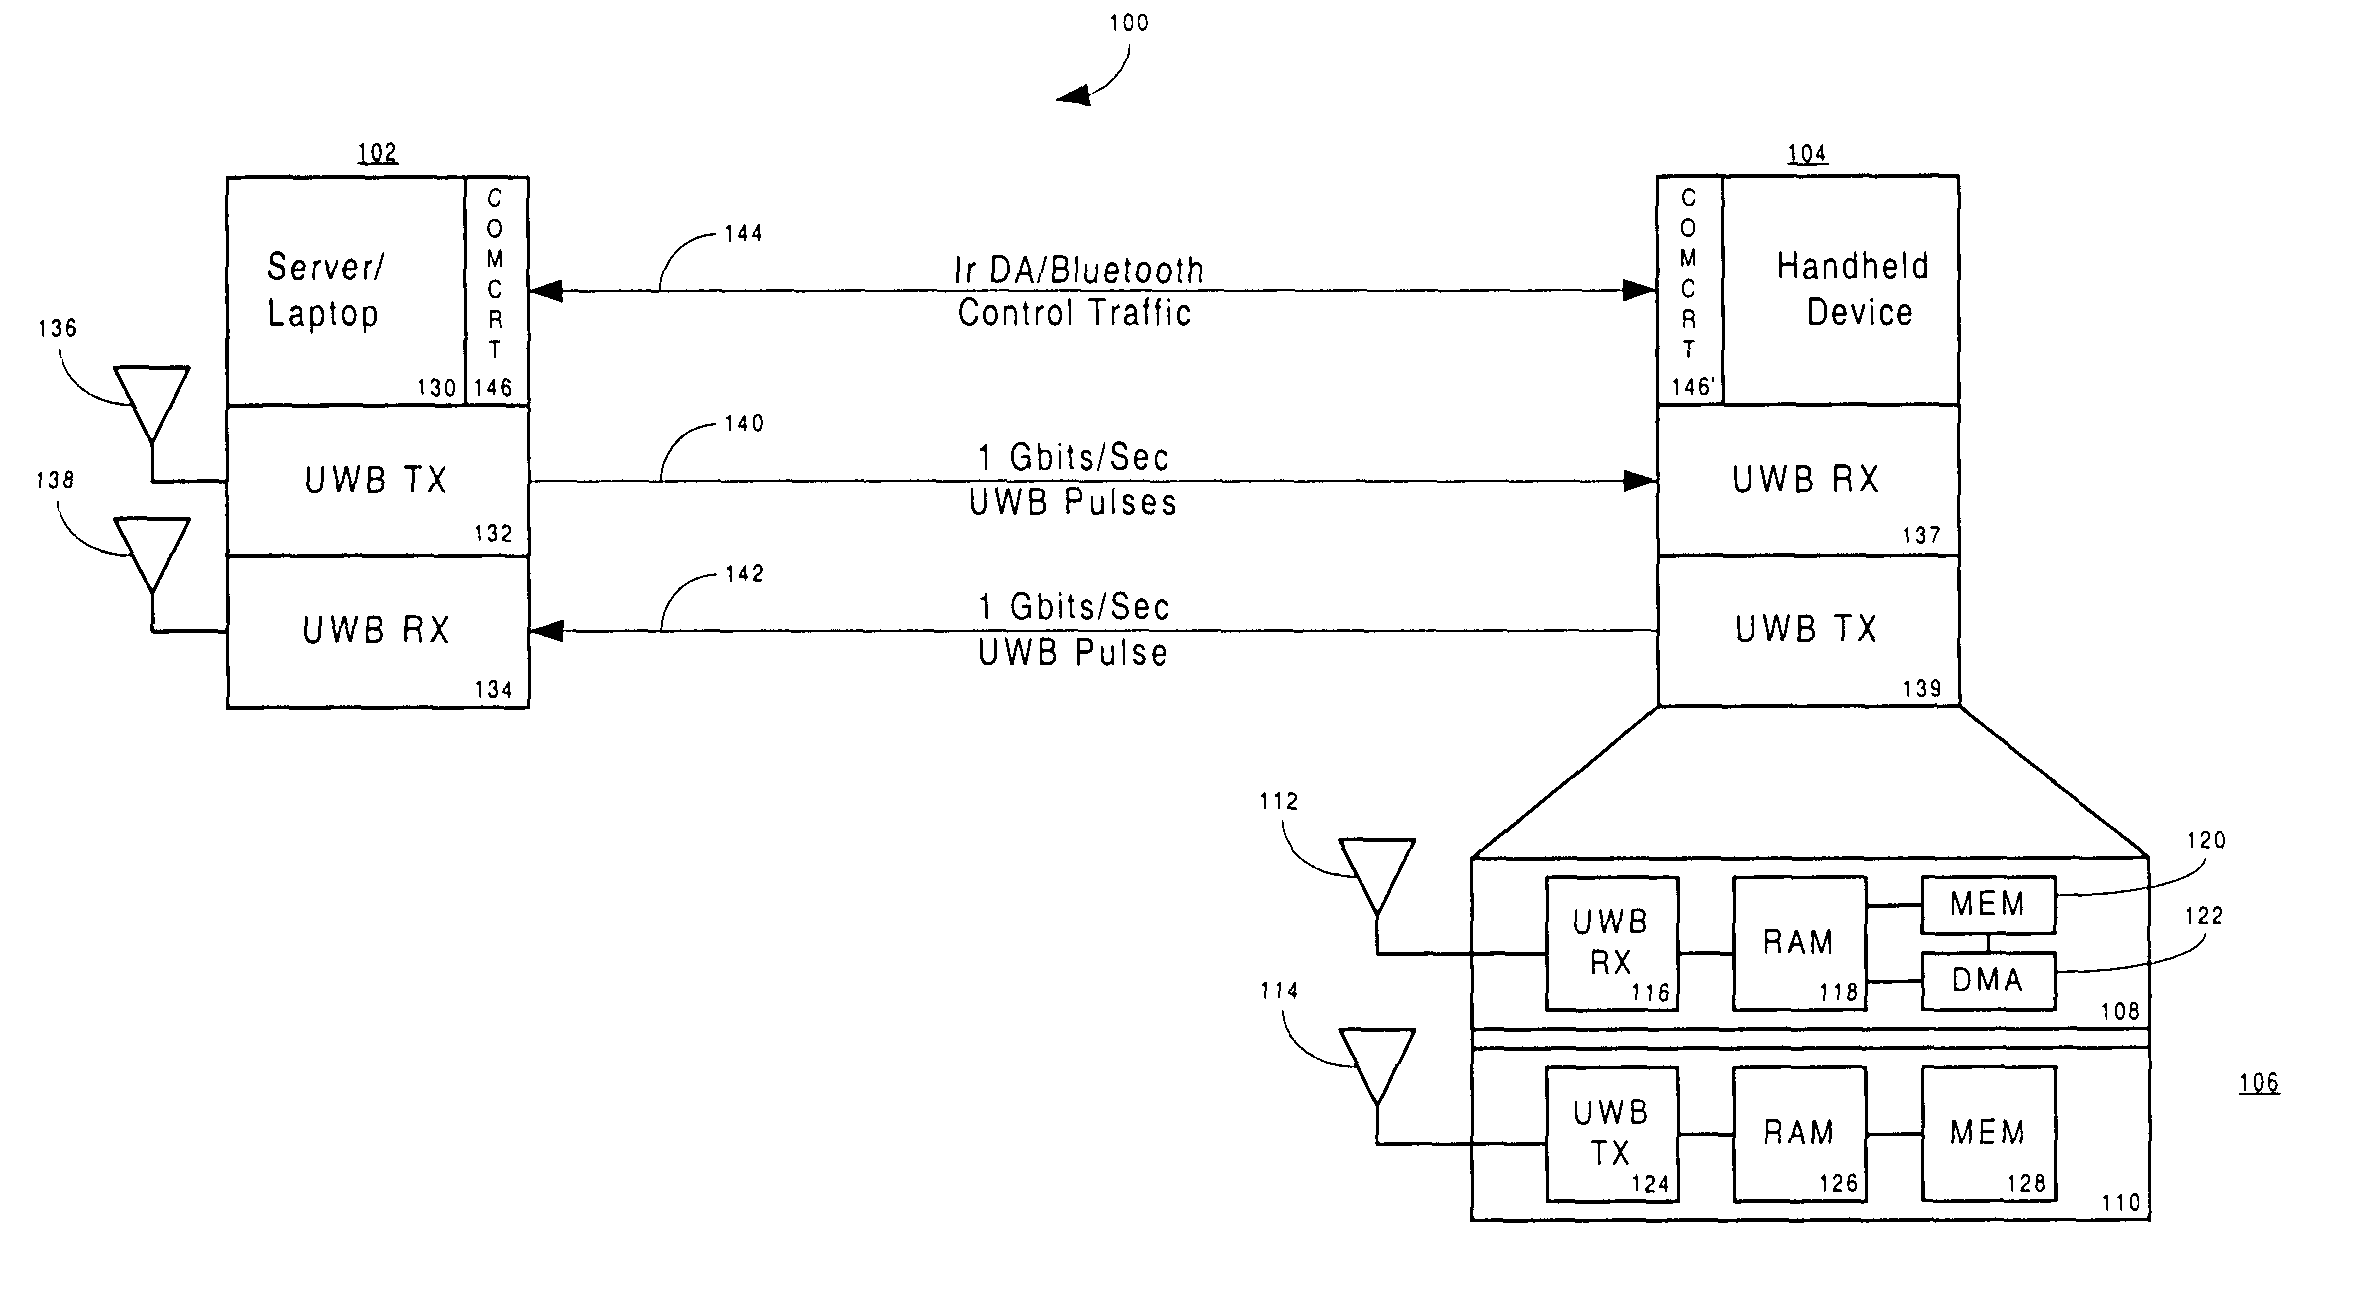 Ultra-wideband/low power communication having a dedicated removable memory module for fast data downloads—apparatus, systems and methods